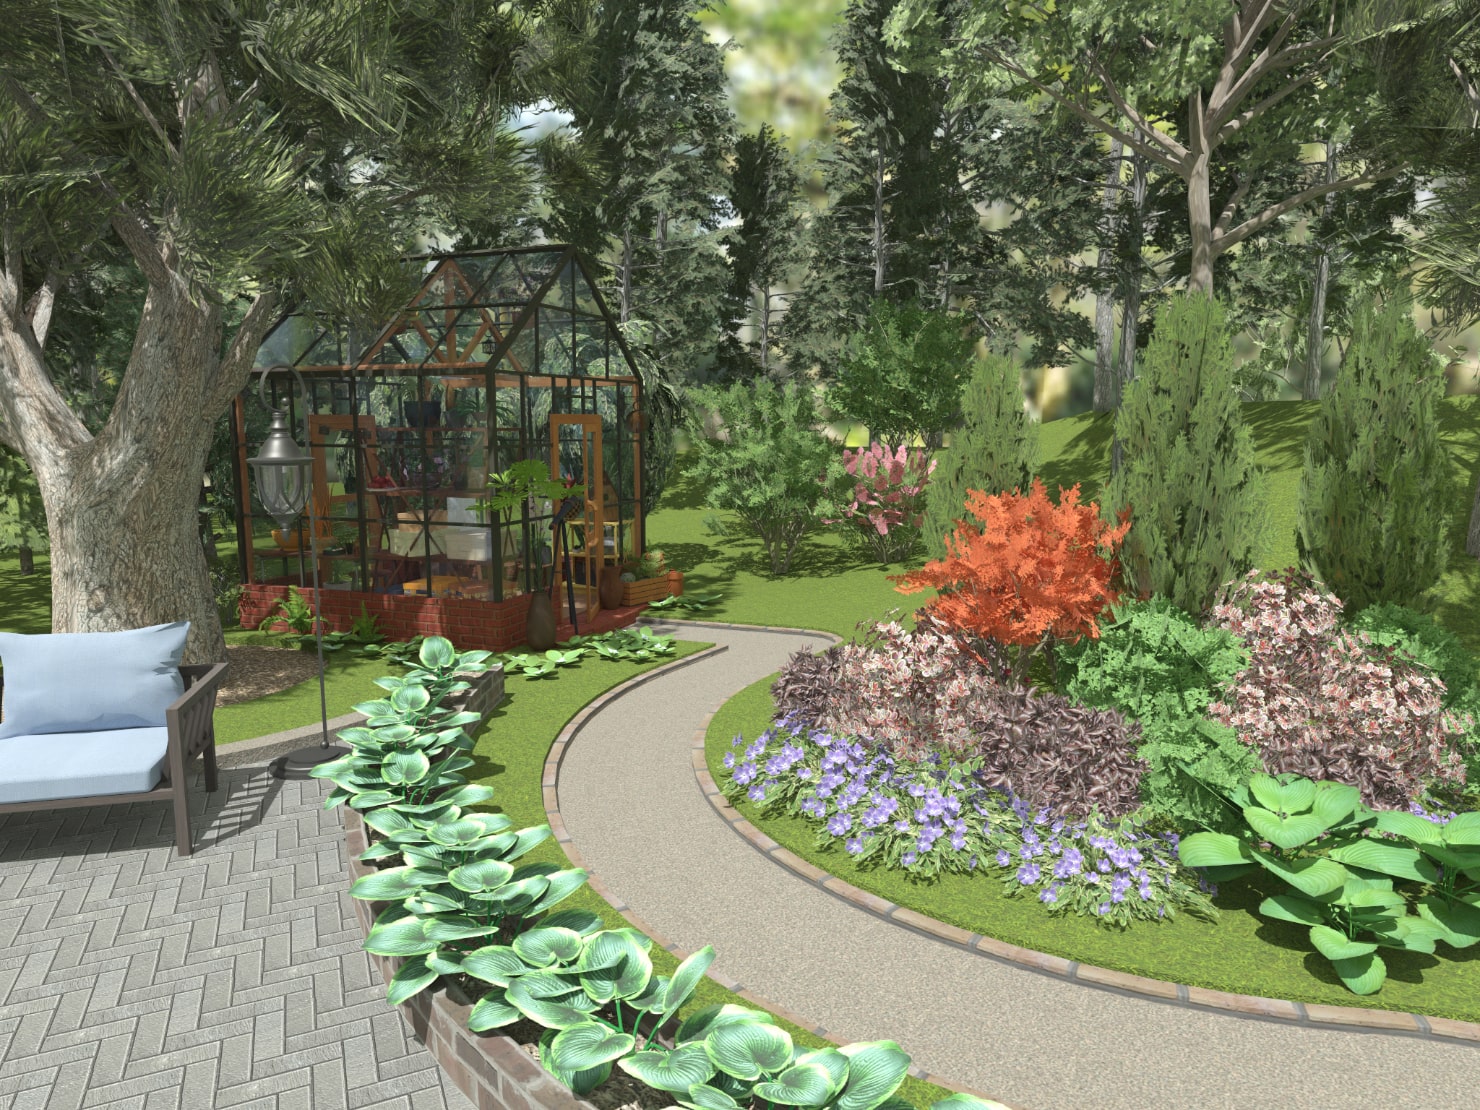 Modern garden created and rendered in Live Home 3D for Mac.